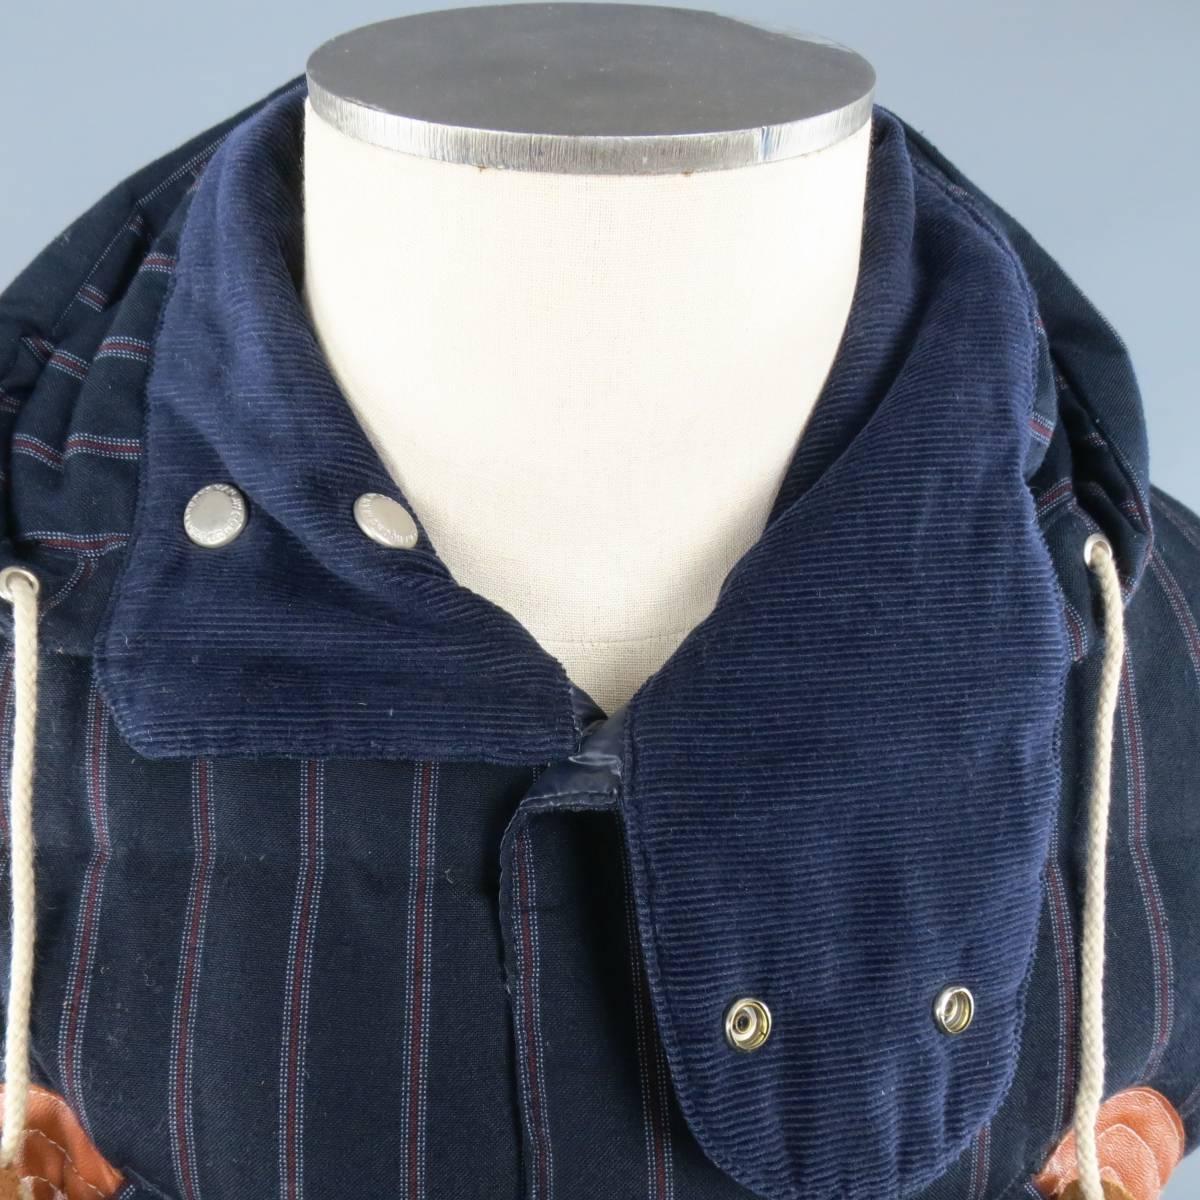 JUNYA WATANABE quilted down vest in a navy and burgundy striped wool mohair fabric featuring a high collar hood with corduroy liner, snap pockets, tan leather details, and nylon liner. Wear throughout. Made in Japan.
 
Good Pre-Owned